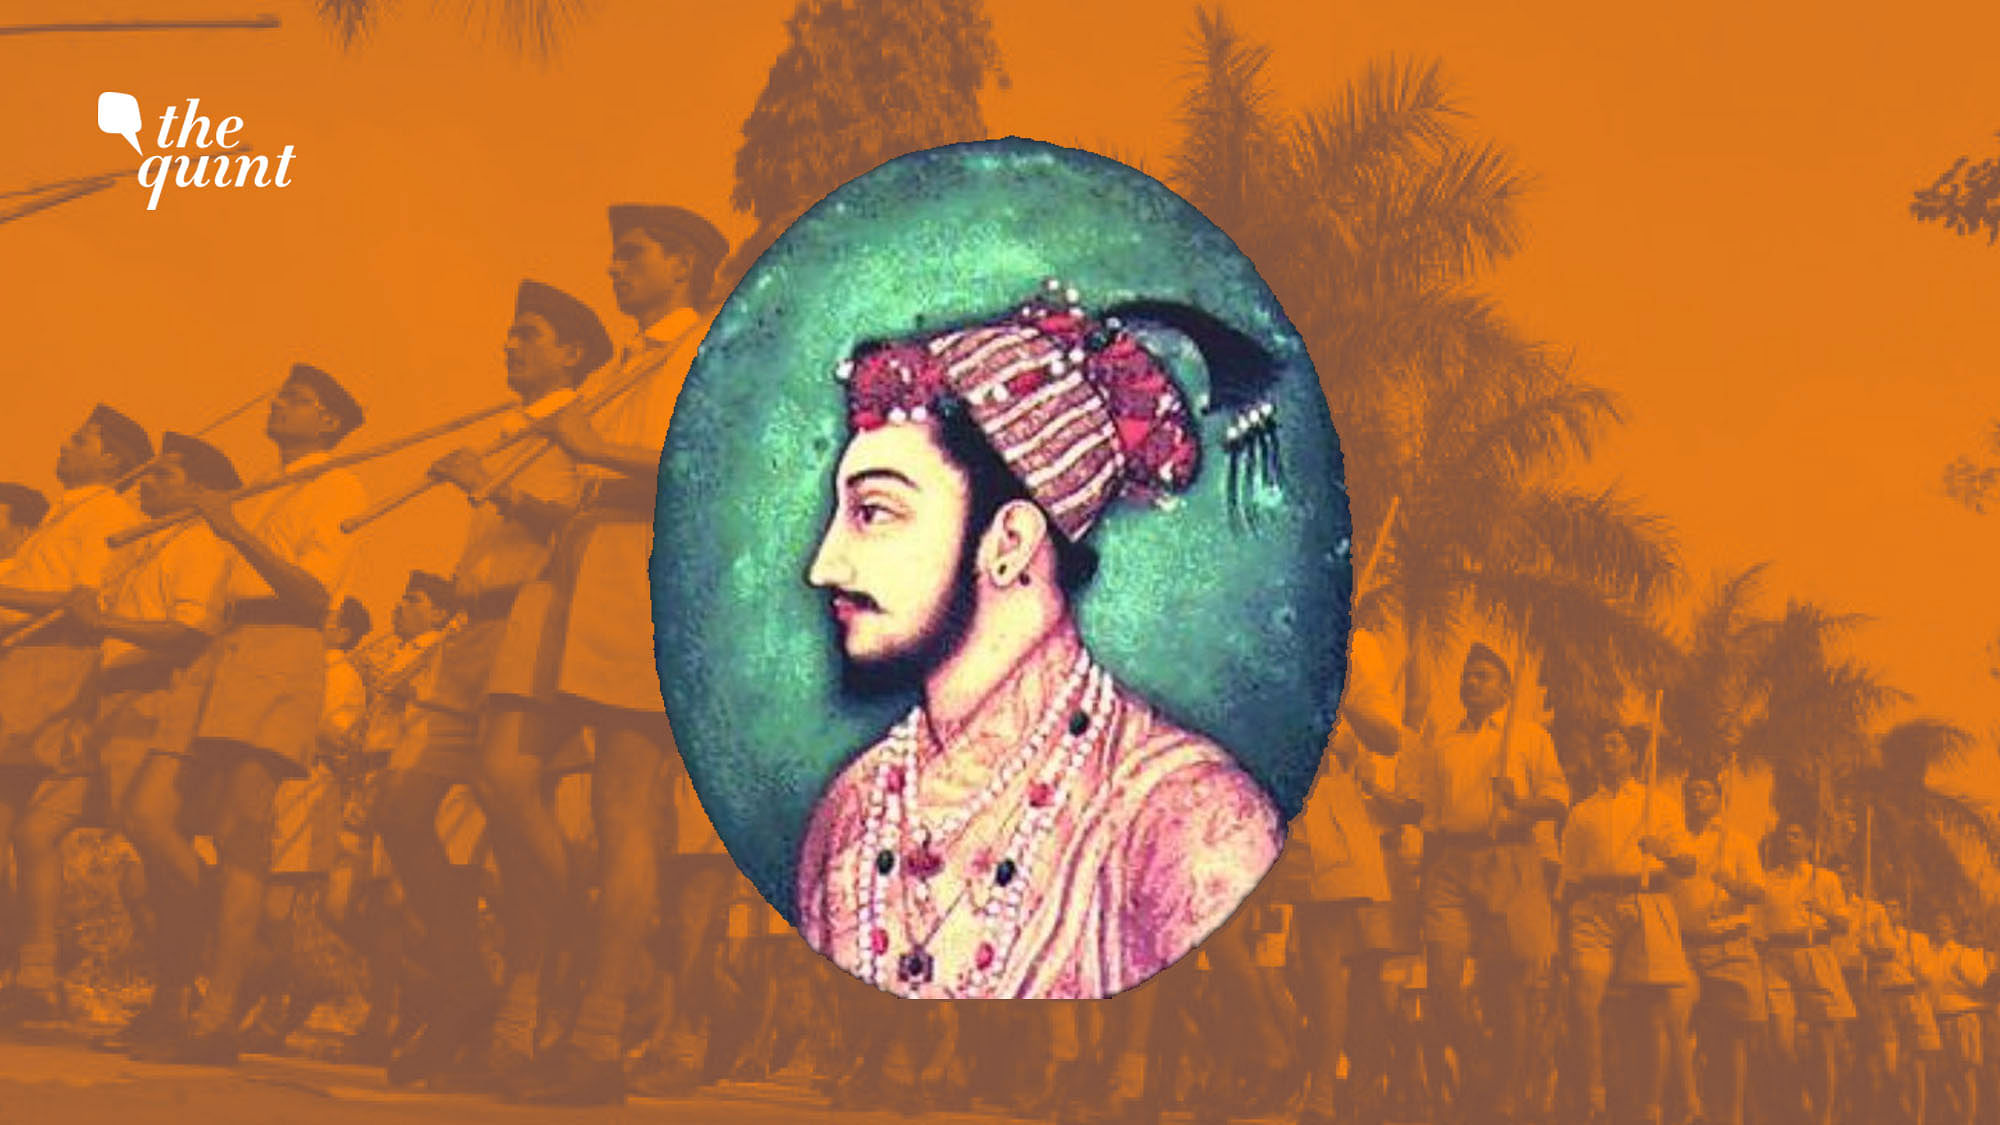 The RSS narrative on Dara Shikoh is an oversimplified reading of history.